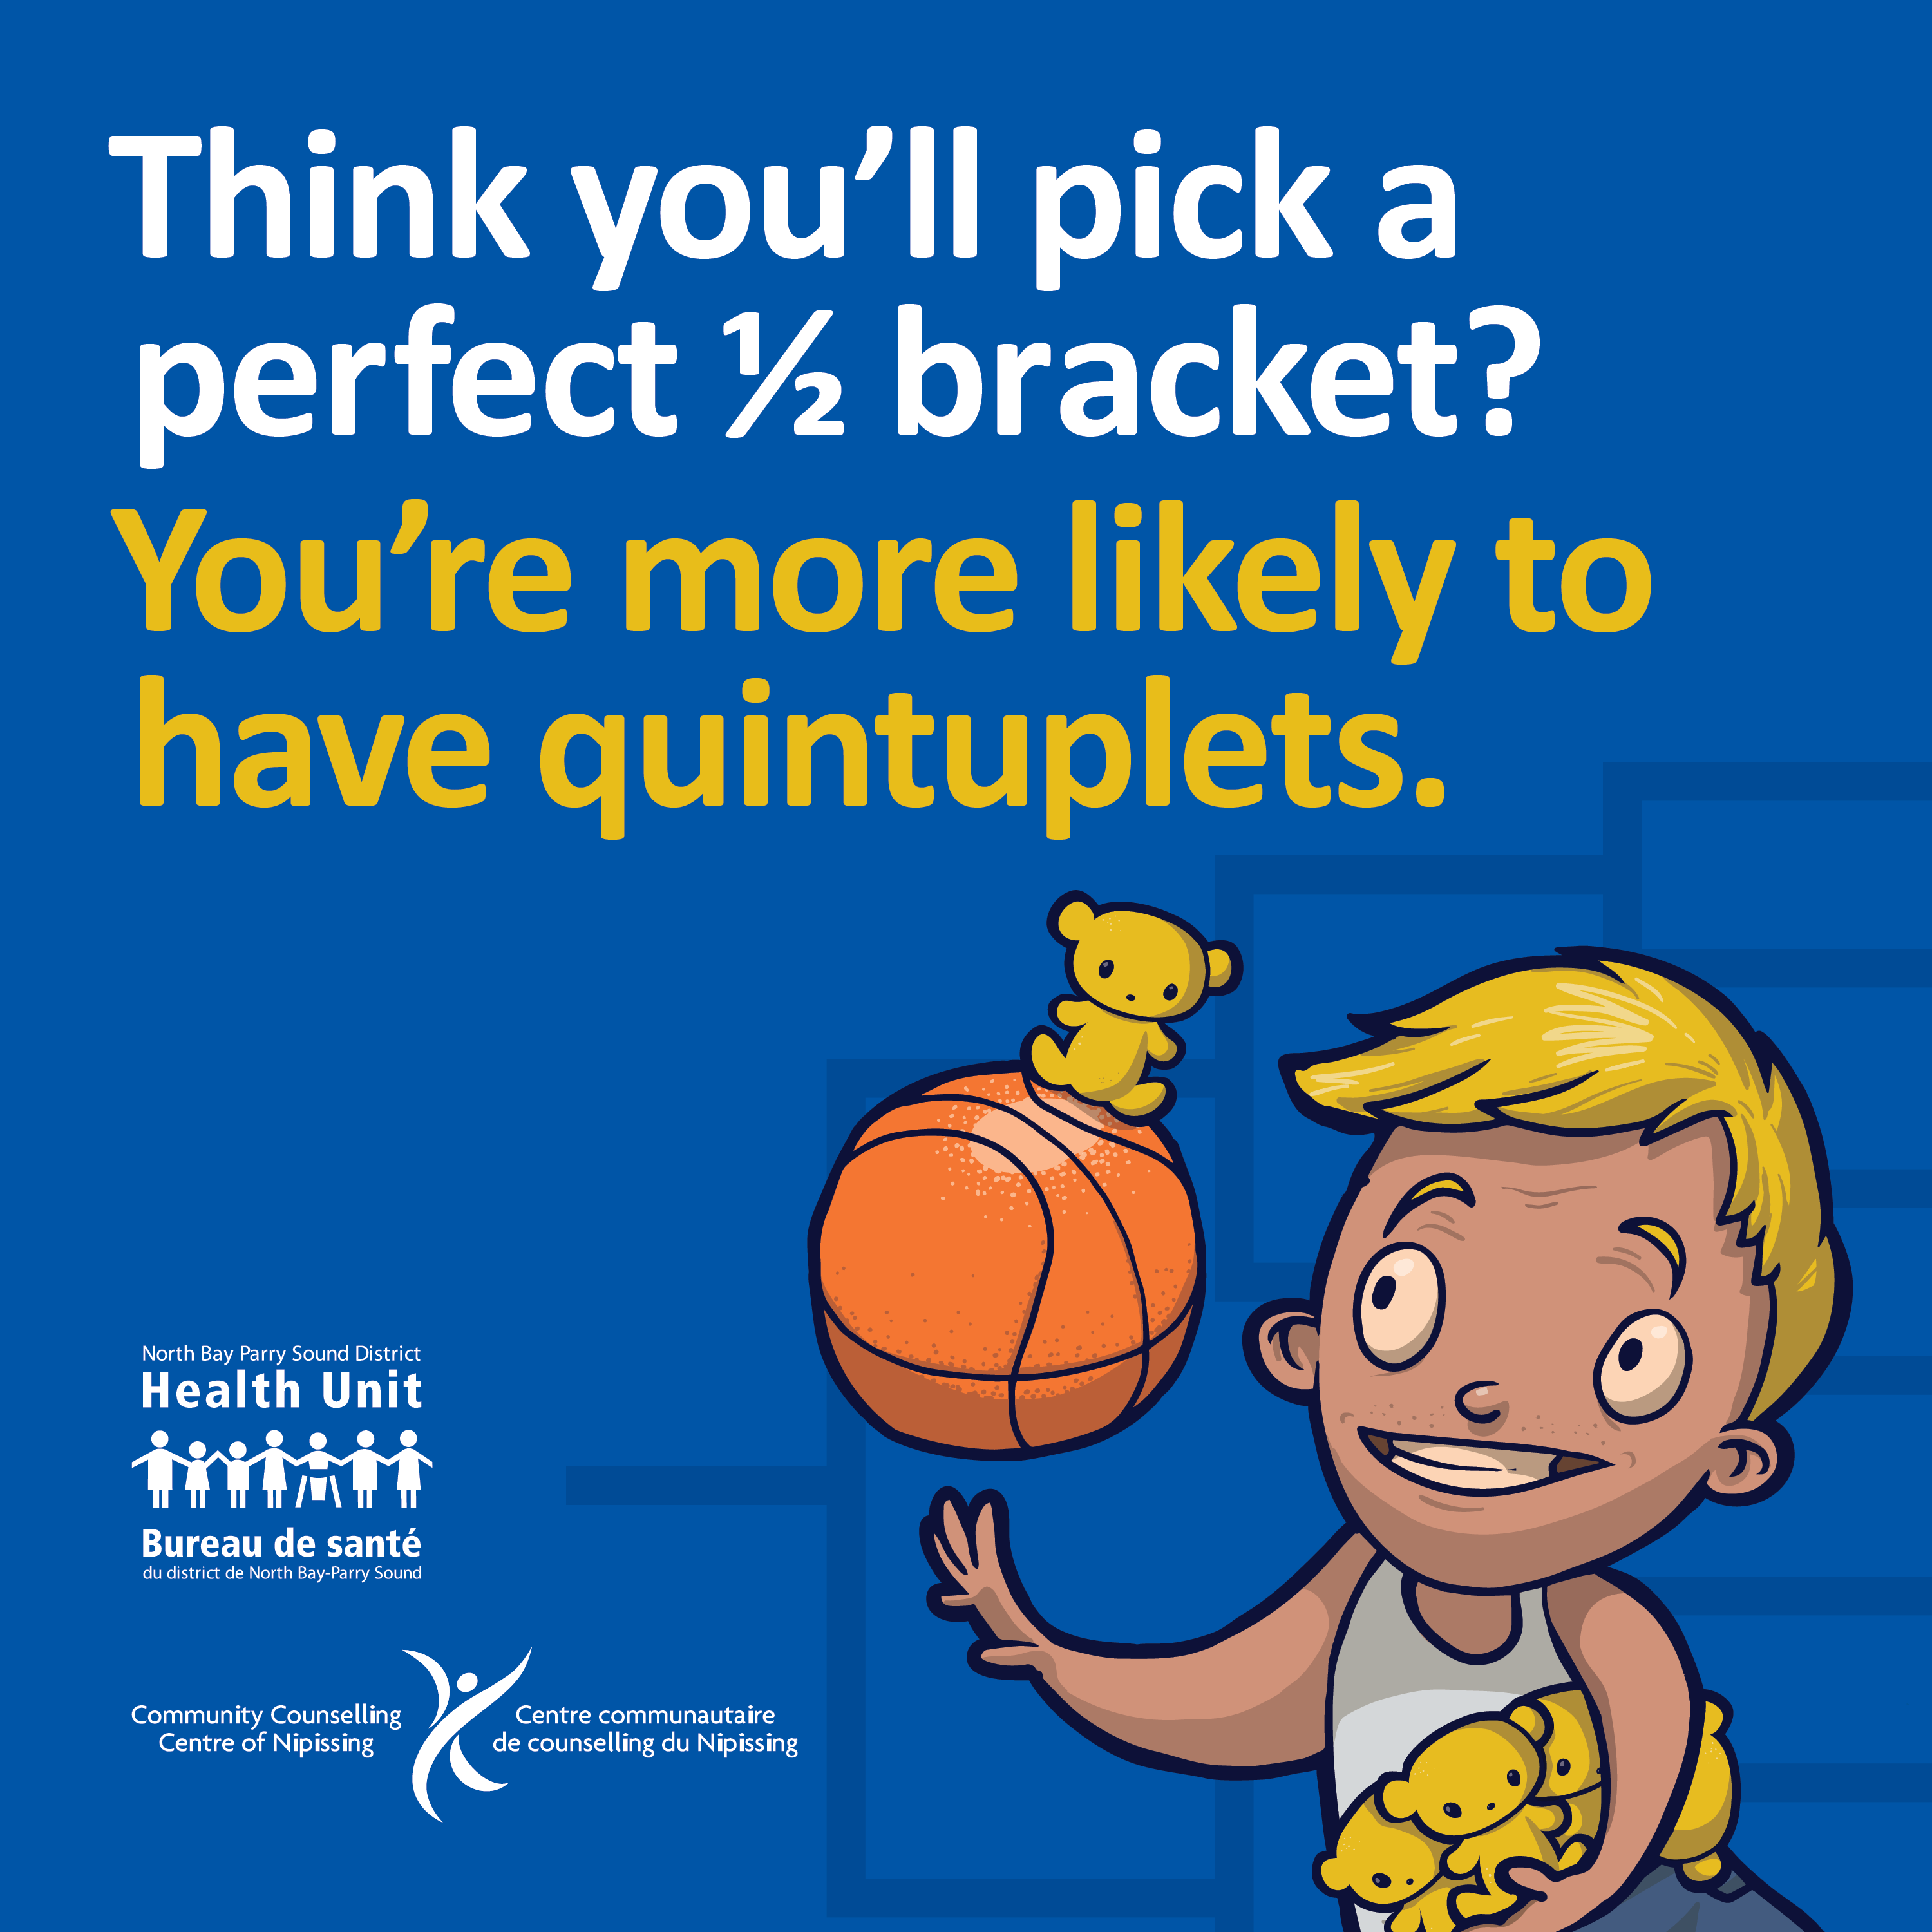 • Think you’ll pick a perfect ½ bracket? You’re more likely to have quintuplets.